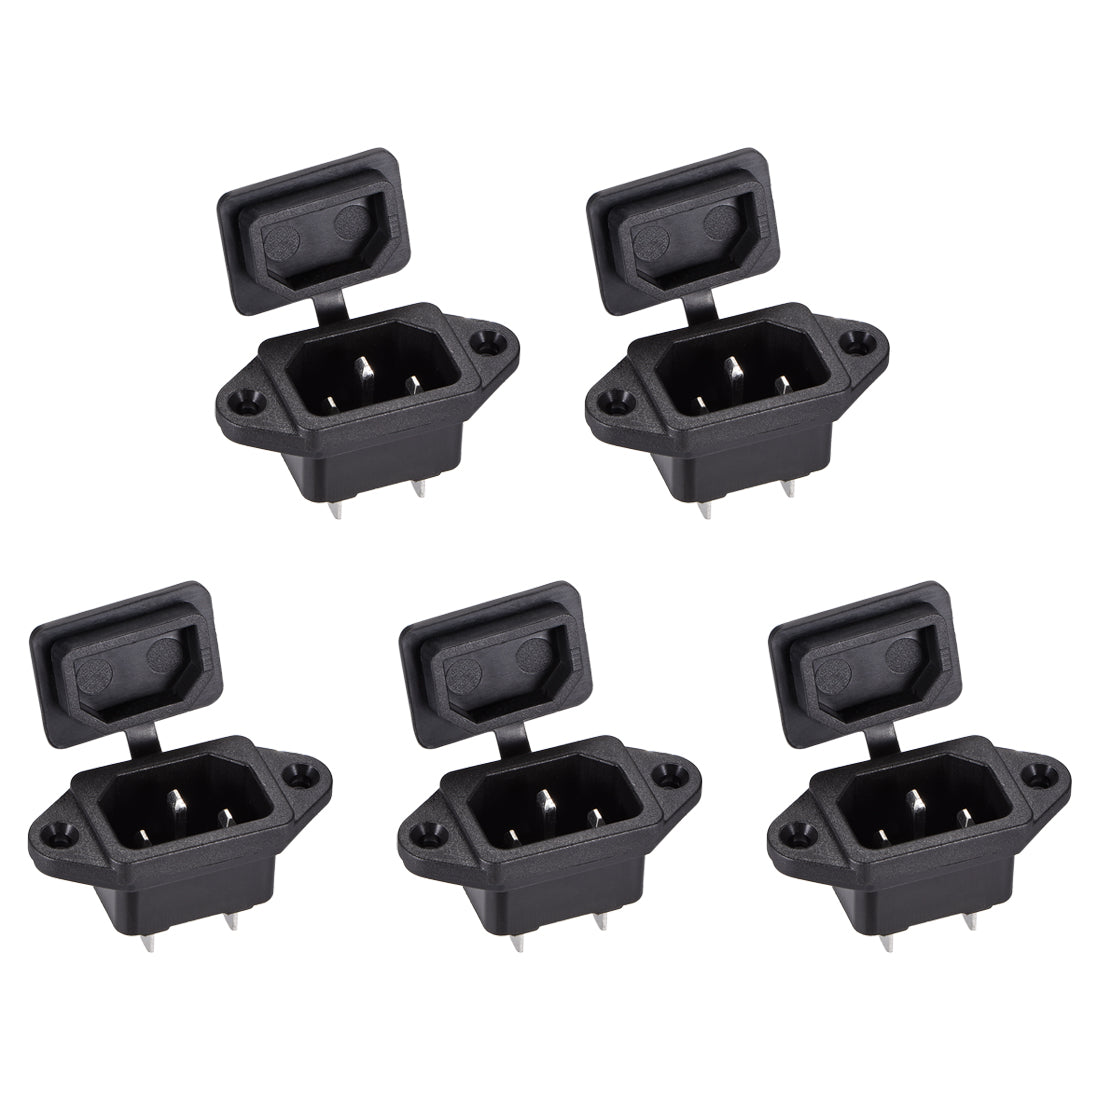 uxcell Uxcell C14 Panel Mount Plug Adapter AC 250V 10A 3 Pins IEC Inlet Module Plug Power Connector Socket with cover 5pcs